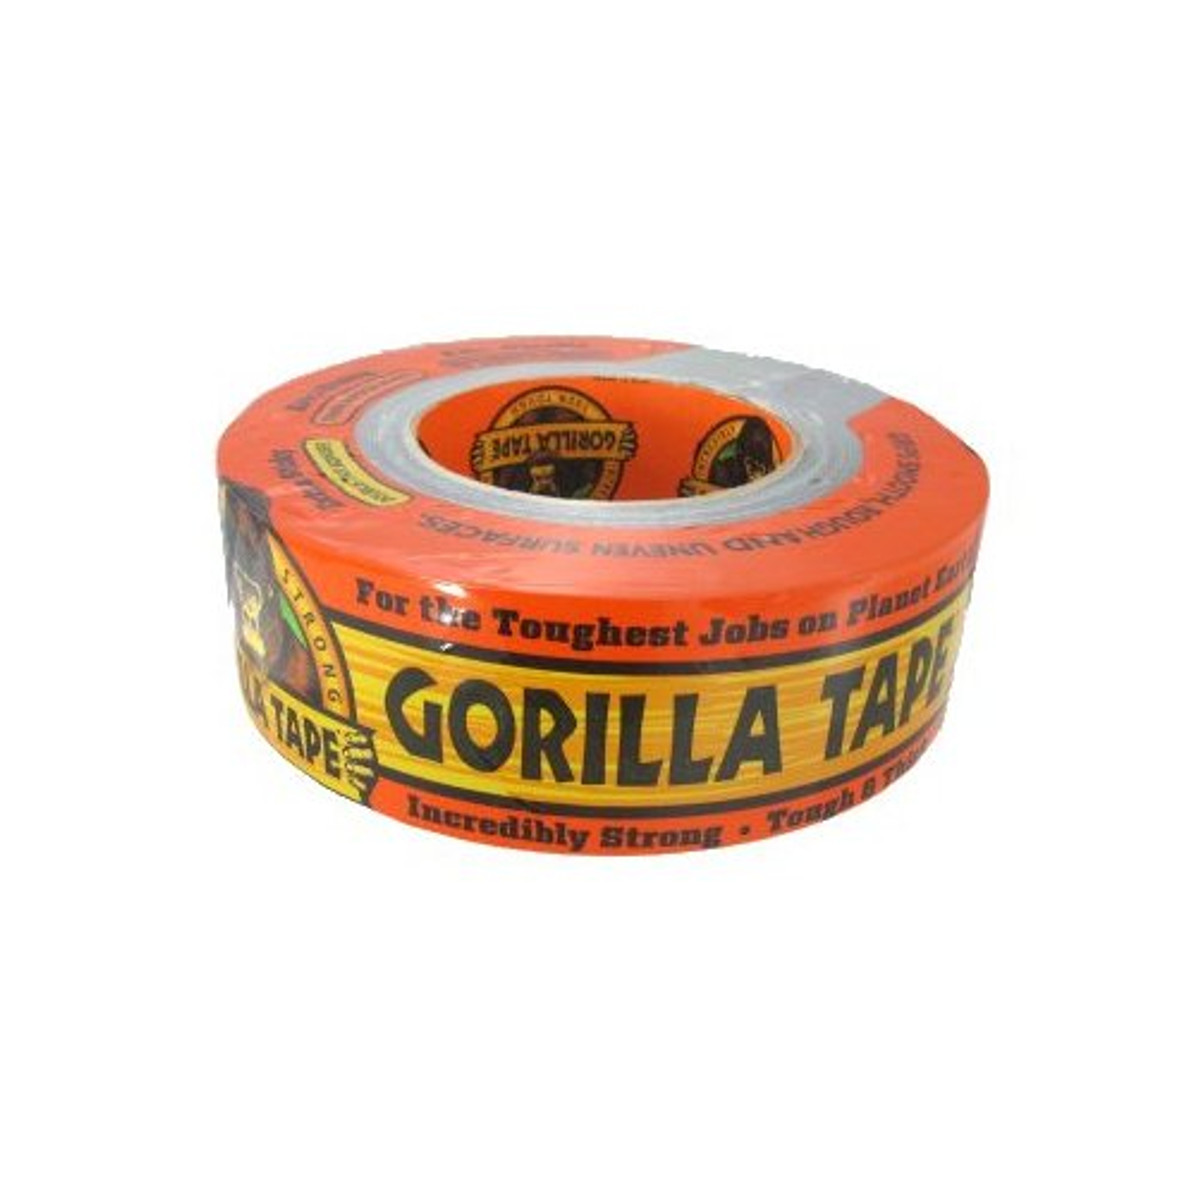 Gorilla Tape, White Duct 1.88 x 30 yd, White, (Pack of 2)